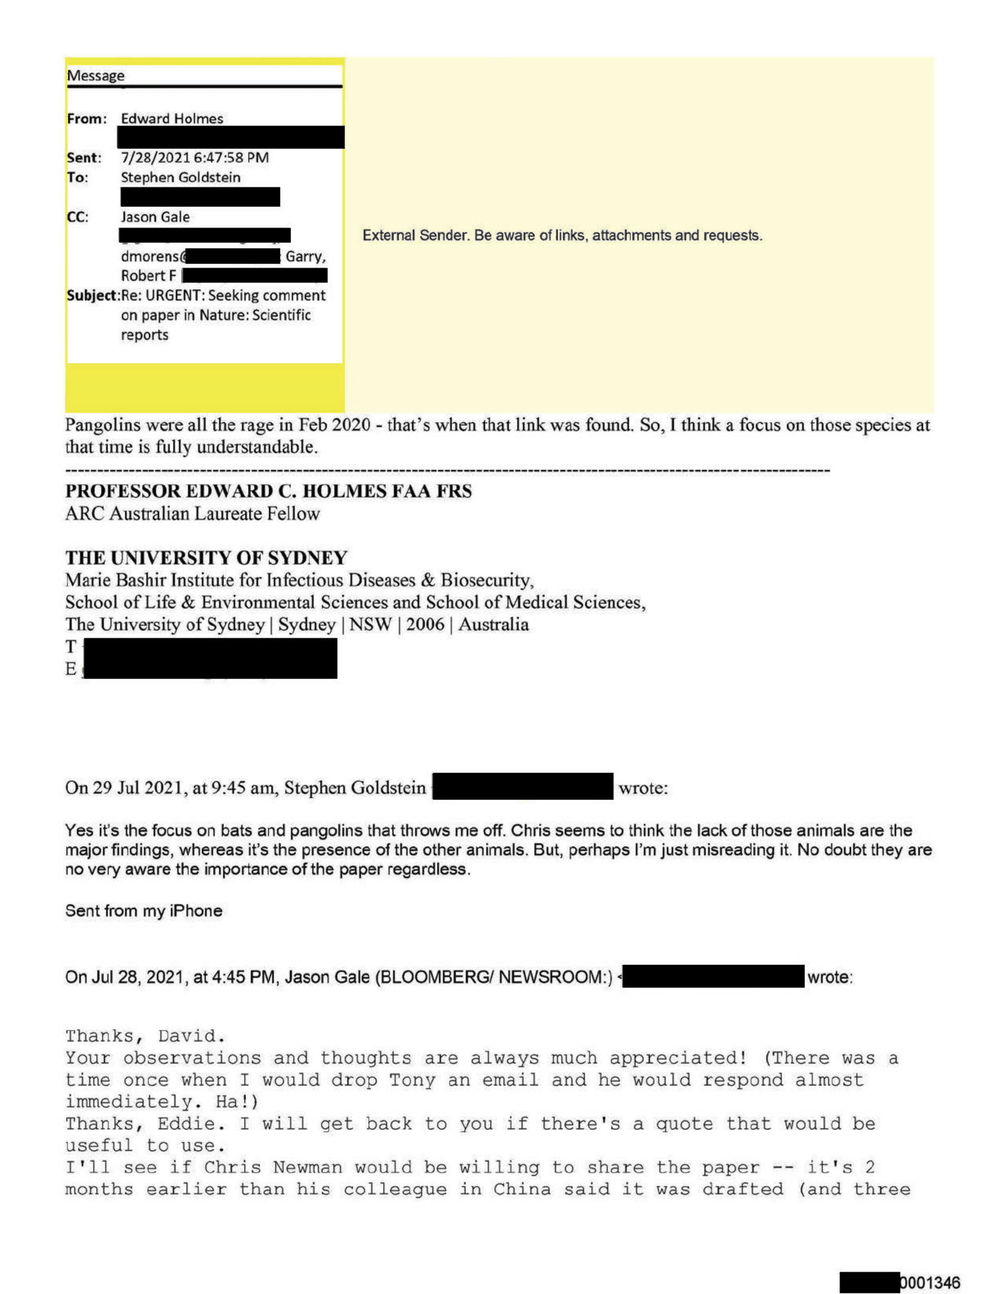 Page 41 from David Morens NIH Emails Redacted